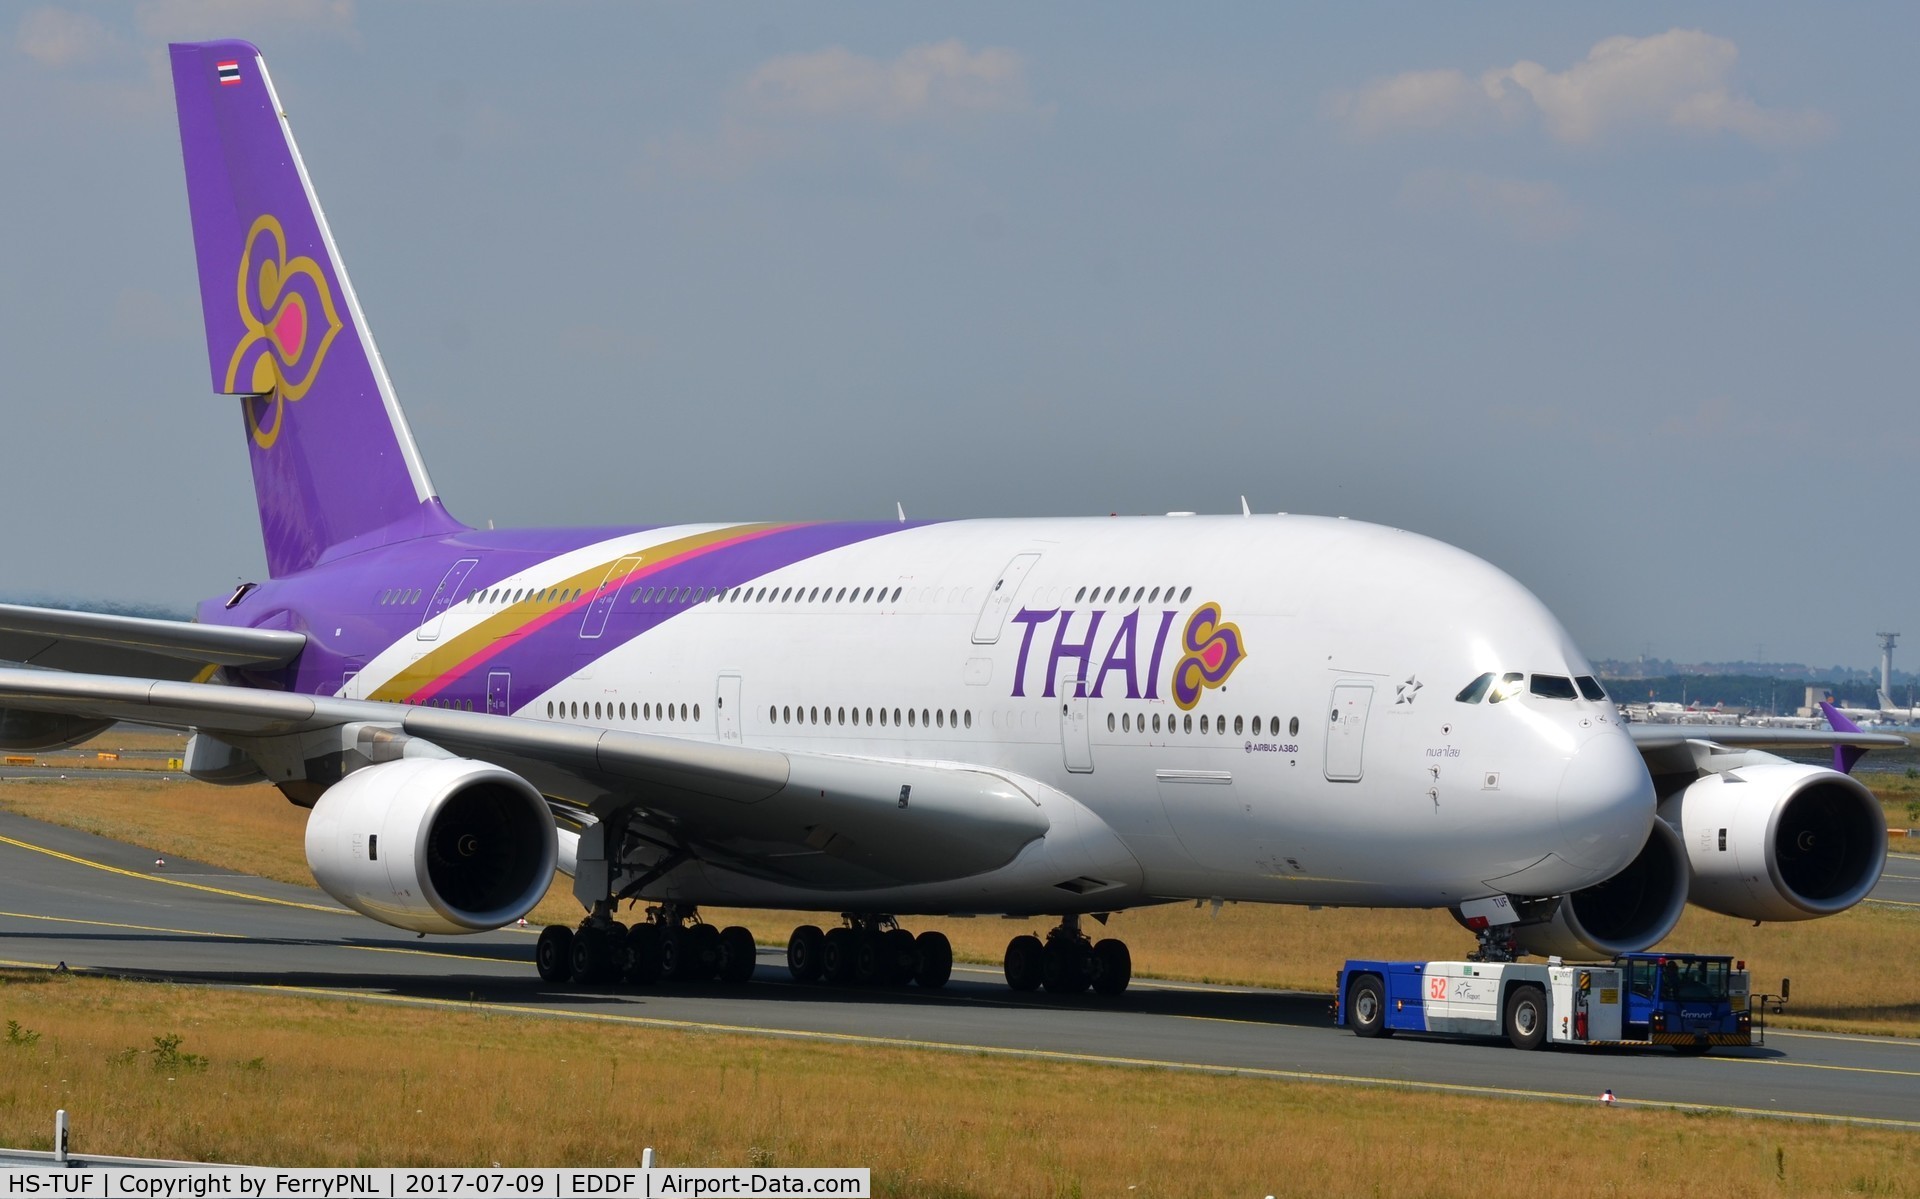 HS-TUF, 2013 Airbus A380-841 C/N 131, Thai A338 being towed to its gate.